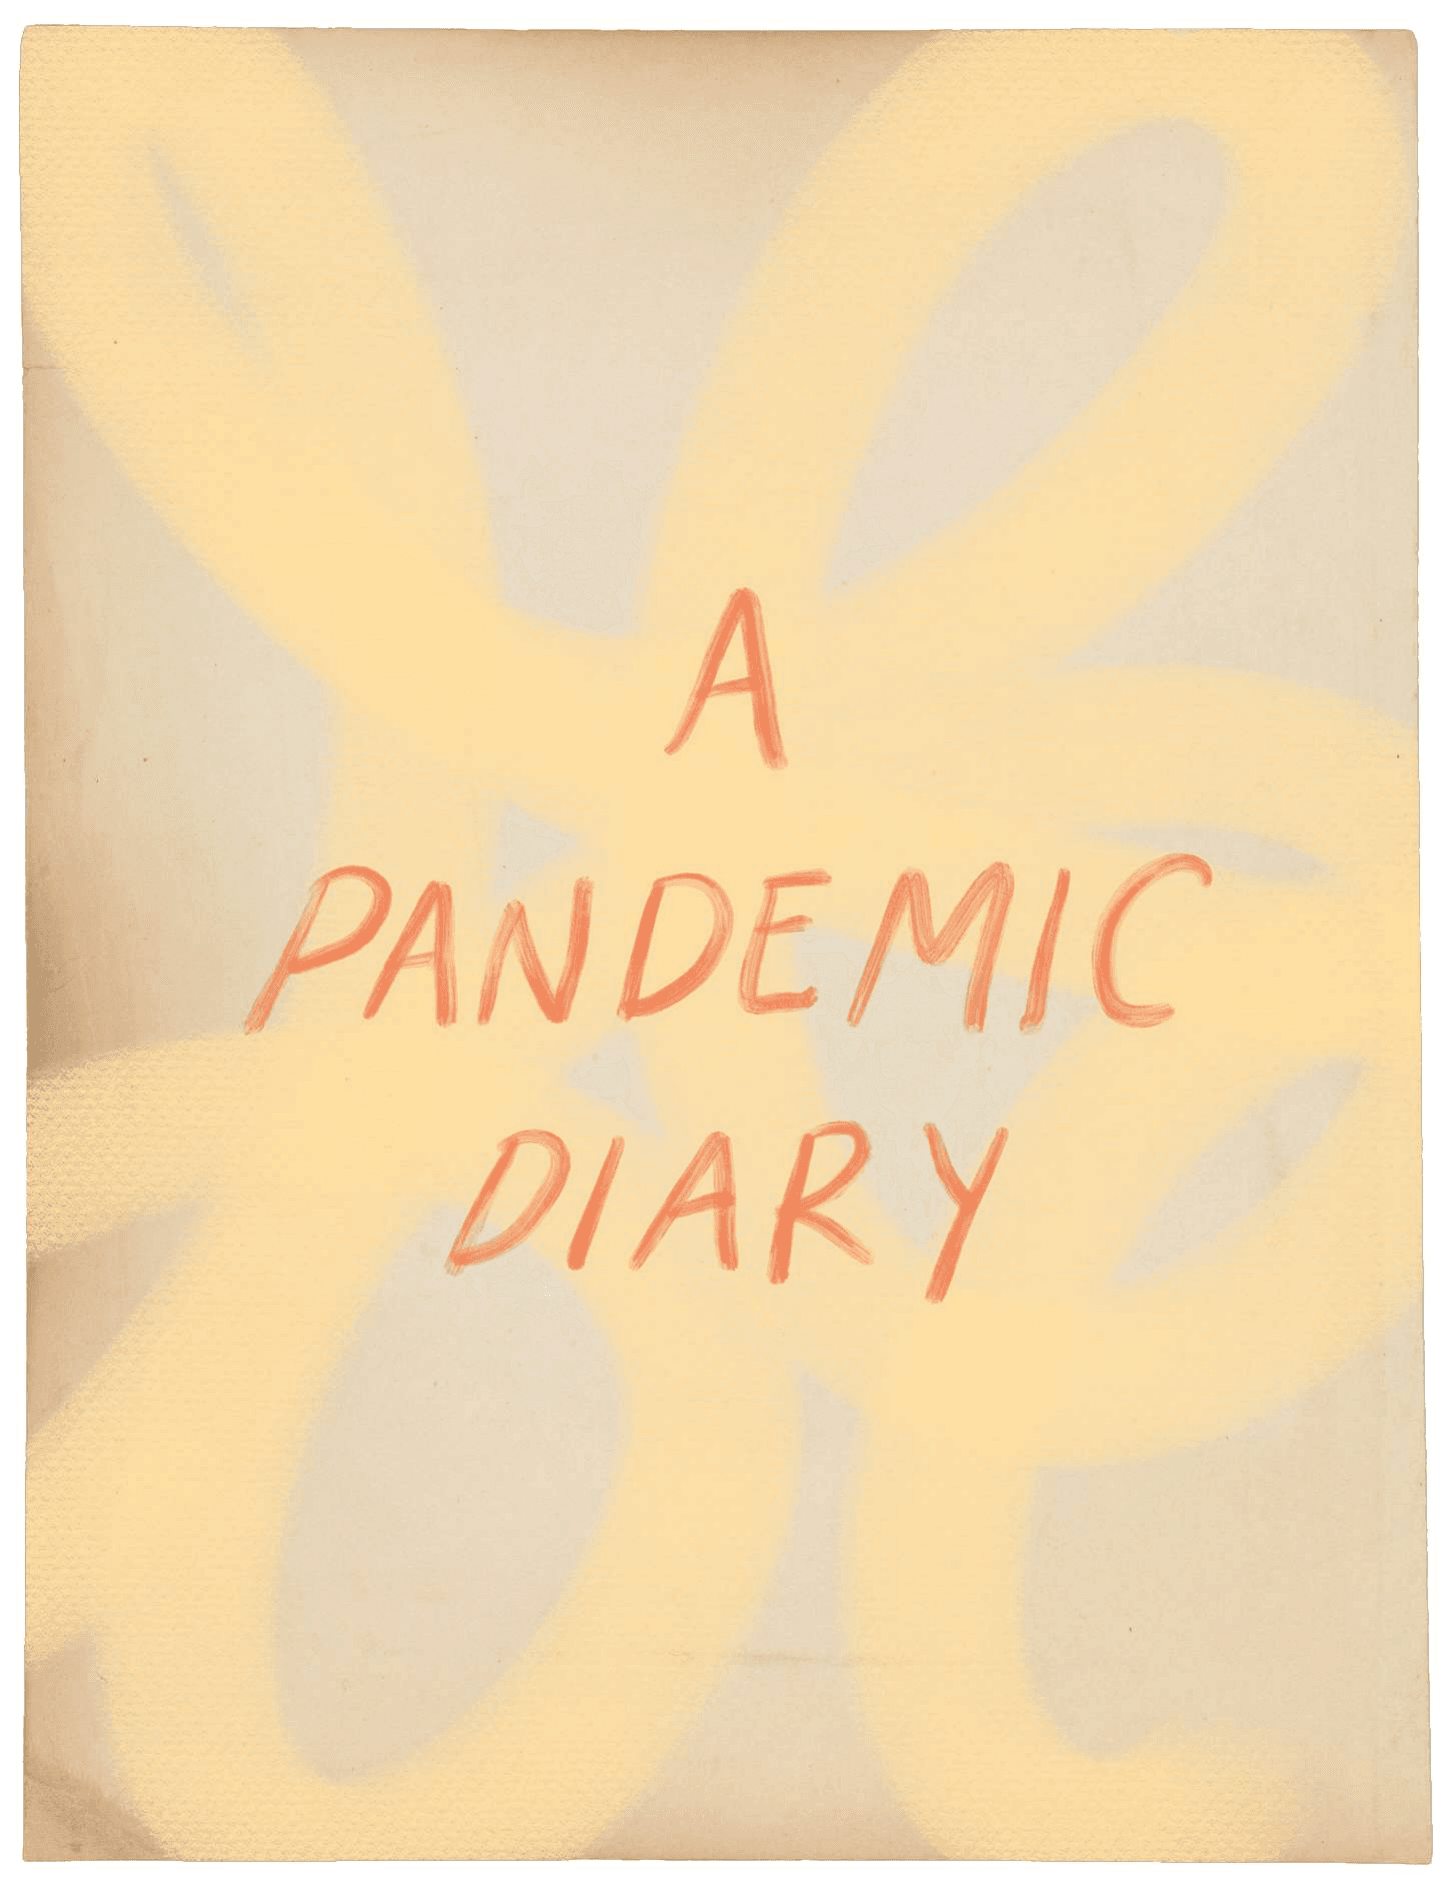 Hornabrook_Sophia_COMD_335_A_Pandemic_Diary_compressed_d25cebc1b3.001.png - image 0